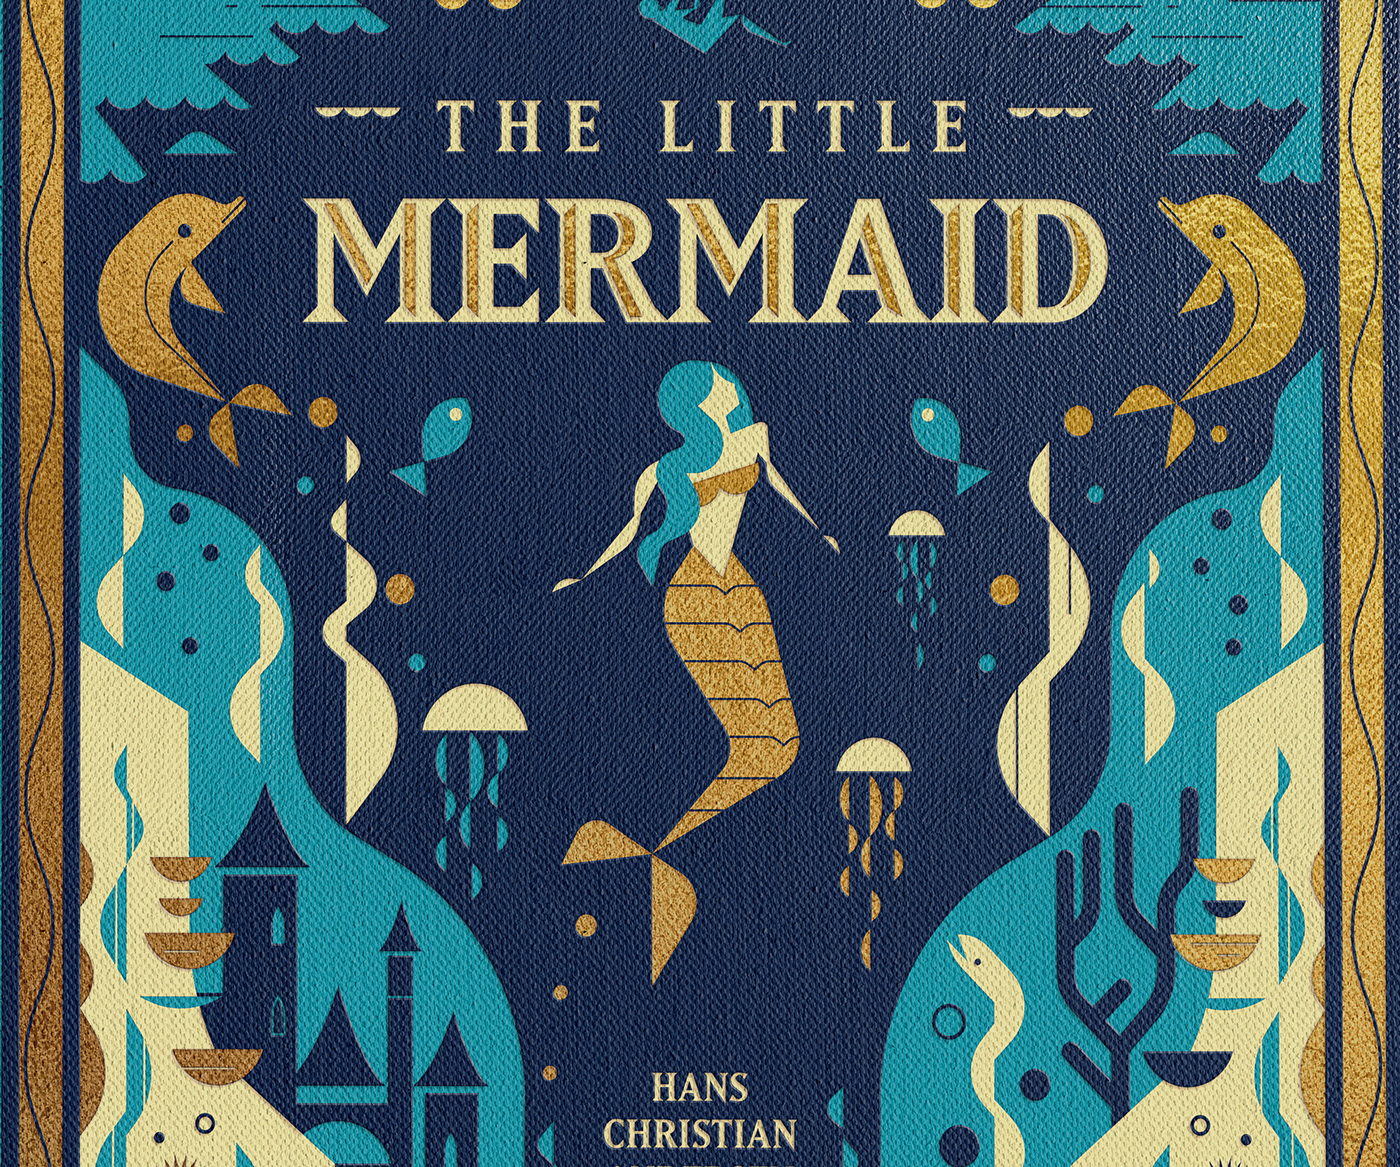 book book cover peter pan wizard of oz mermaid cover design Cover Art characters vector